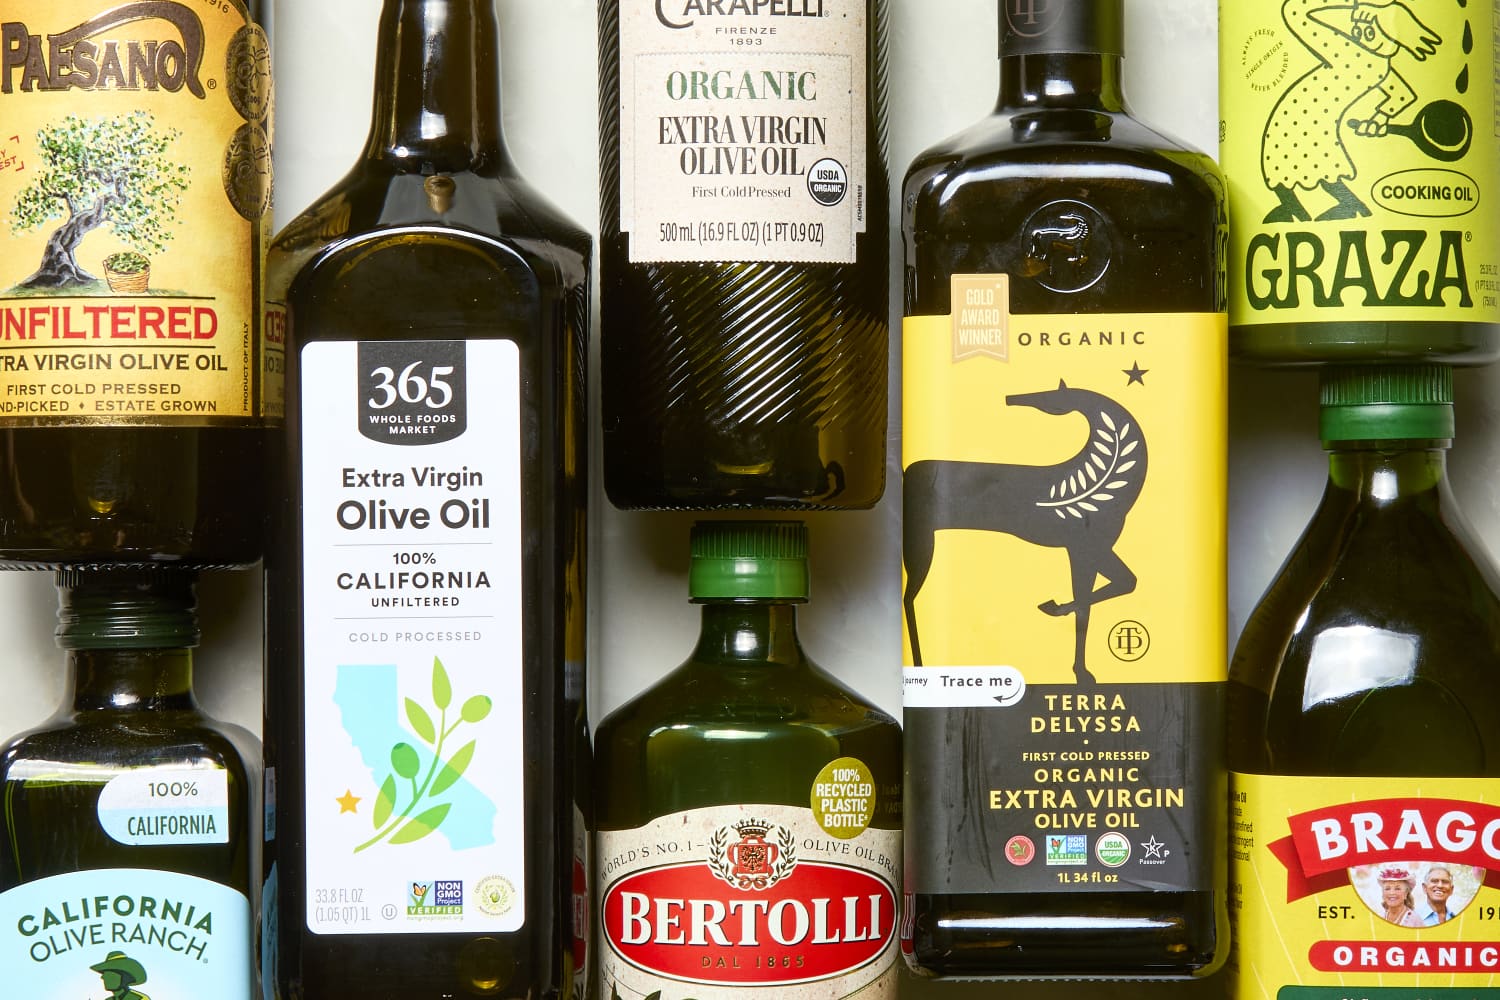 The Best Olive Oils from the Grocery Store (We Tested 8 Brands)